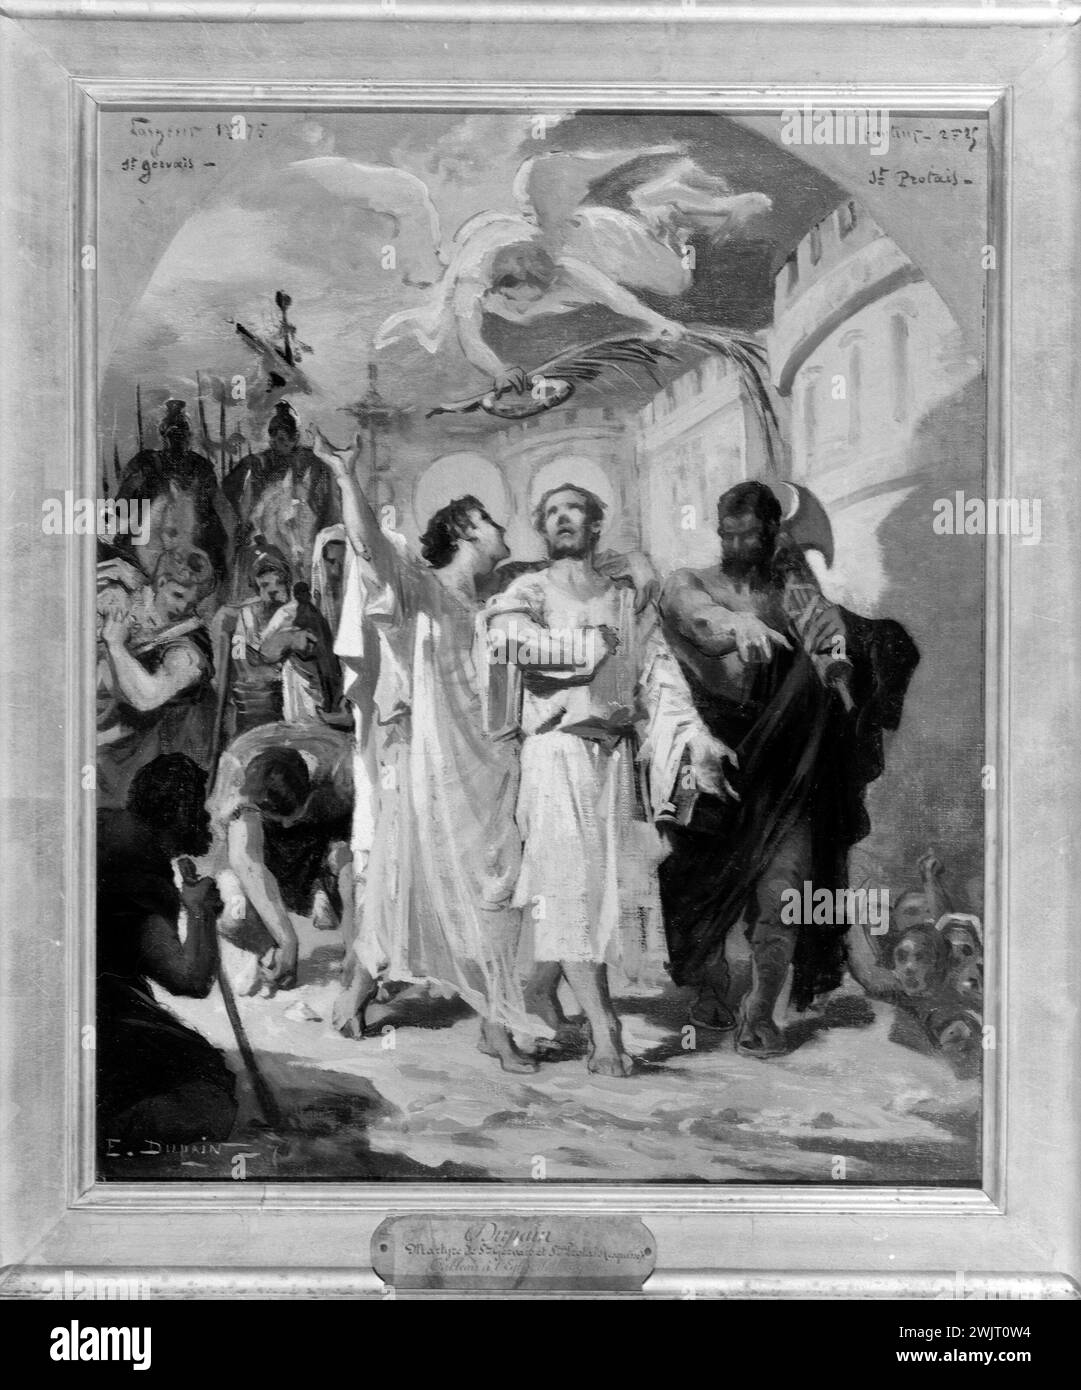 Edmond Dupain. 'Saint Gervais and Saint Protais led to martyrdom'. Sketch for the church of Pierrefitte. Oil on canvas, between 1875 and 1877. Museum of Fine Arts of the City of Paris, Petit Palais. 52019-19 Catholic, Christian, Pierrefitte Church, sketch, martyr, New Testament, saint, oil on canvas Stock Photo